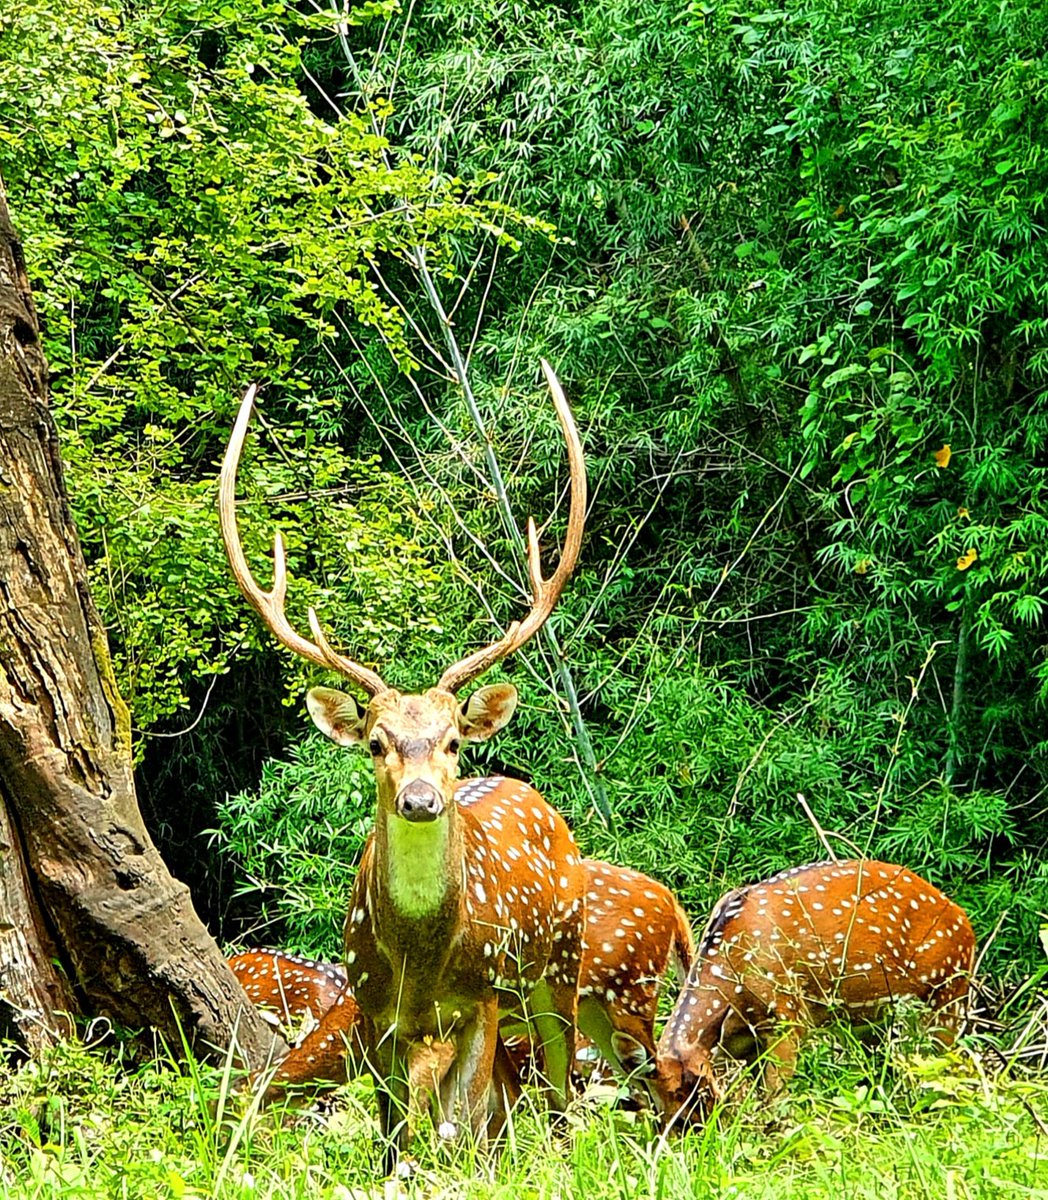 On my way to Ooty..spotted herd of Deer and one even posed for me  #PhotosOfMyLife  #PhotoOfTheDay  #NaturePhotography  #wildlifephotography